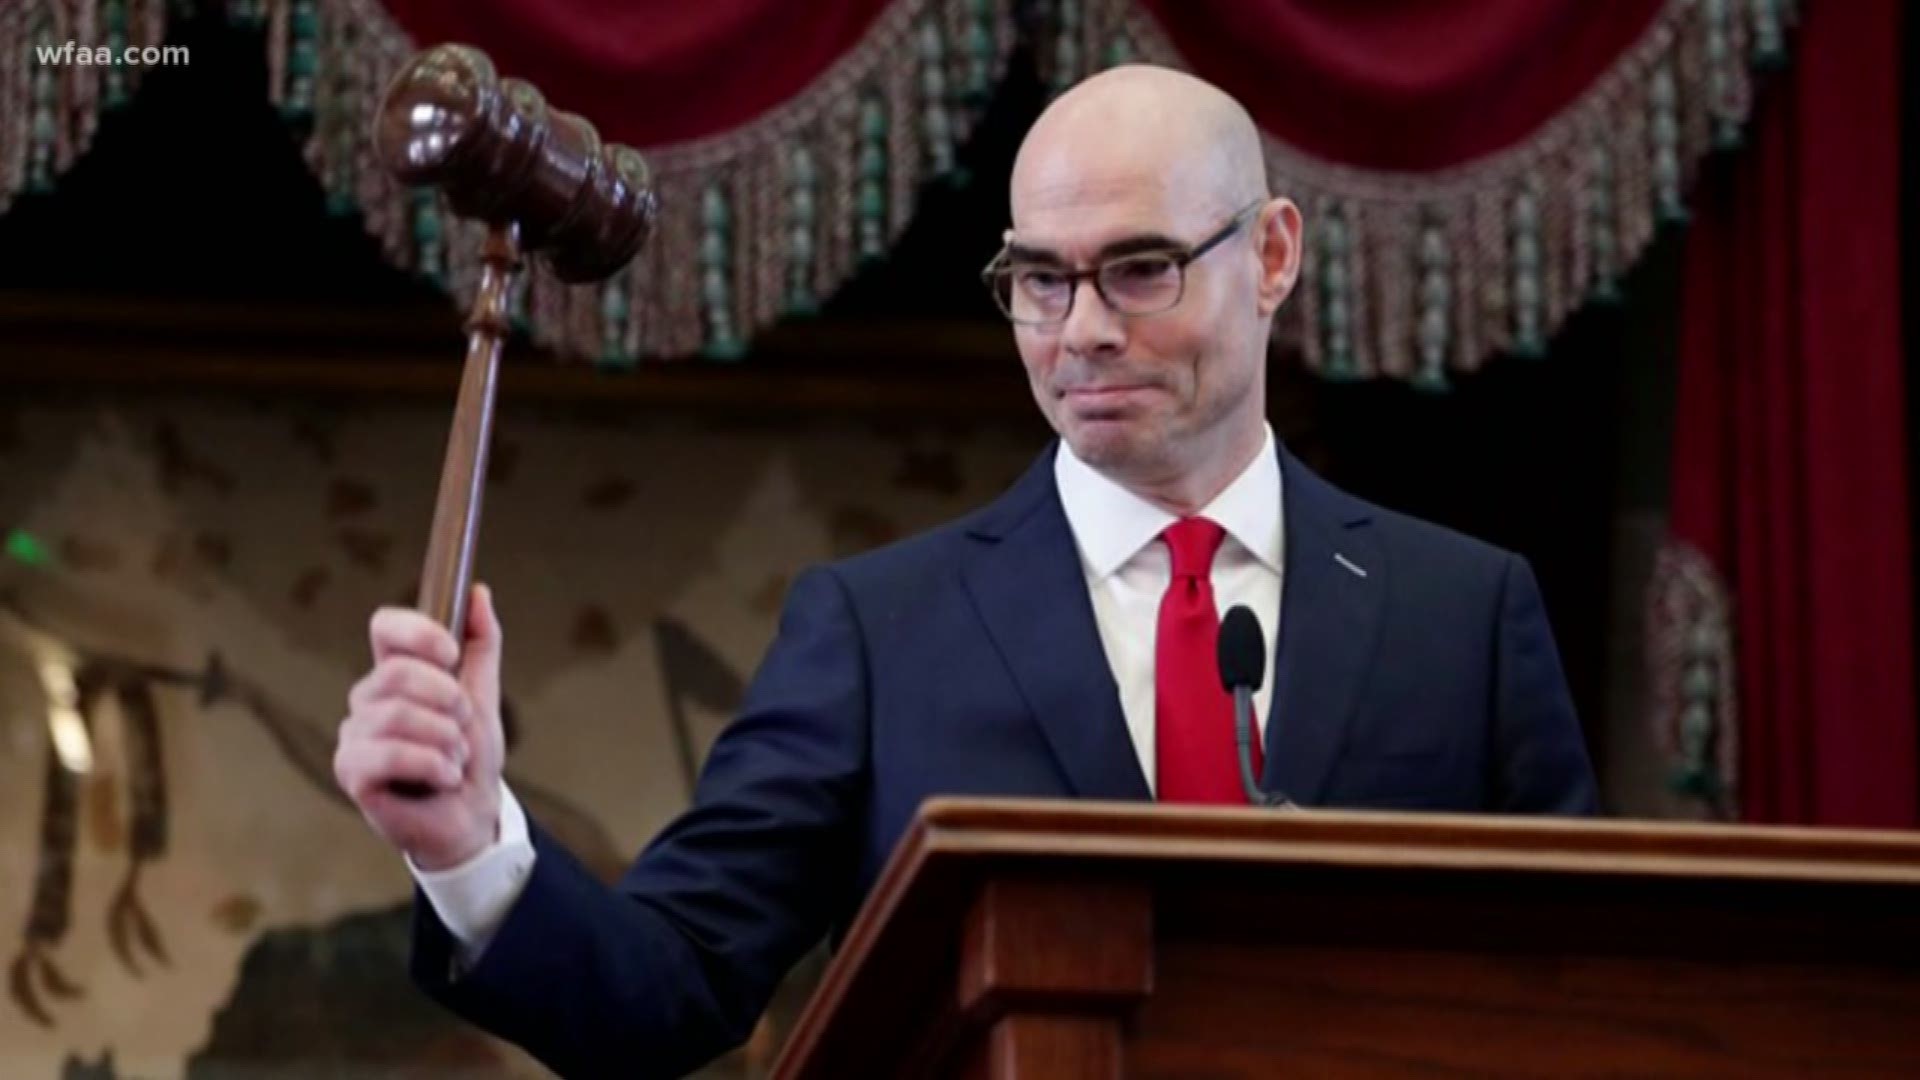 At issue is whether Bonnen and Rep. Dustin Burrows offered a hardline conservative activist credentials in exchange for politically targeting a list of GOP members.